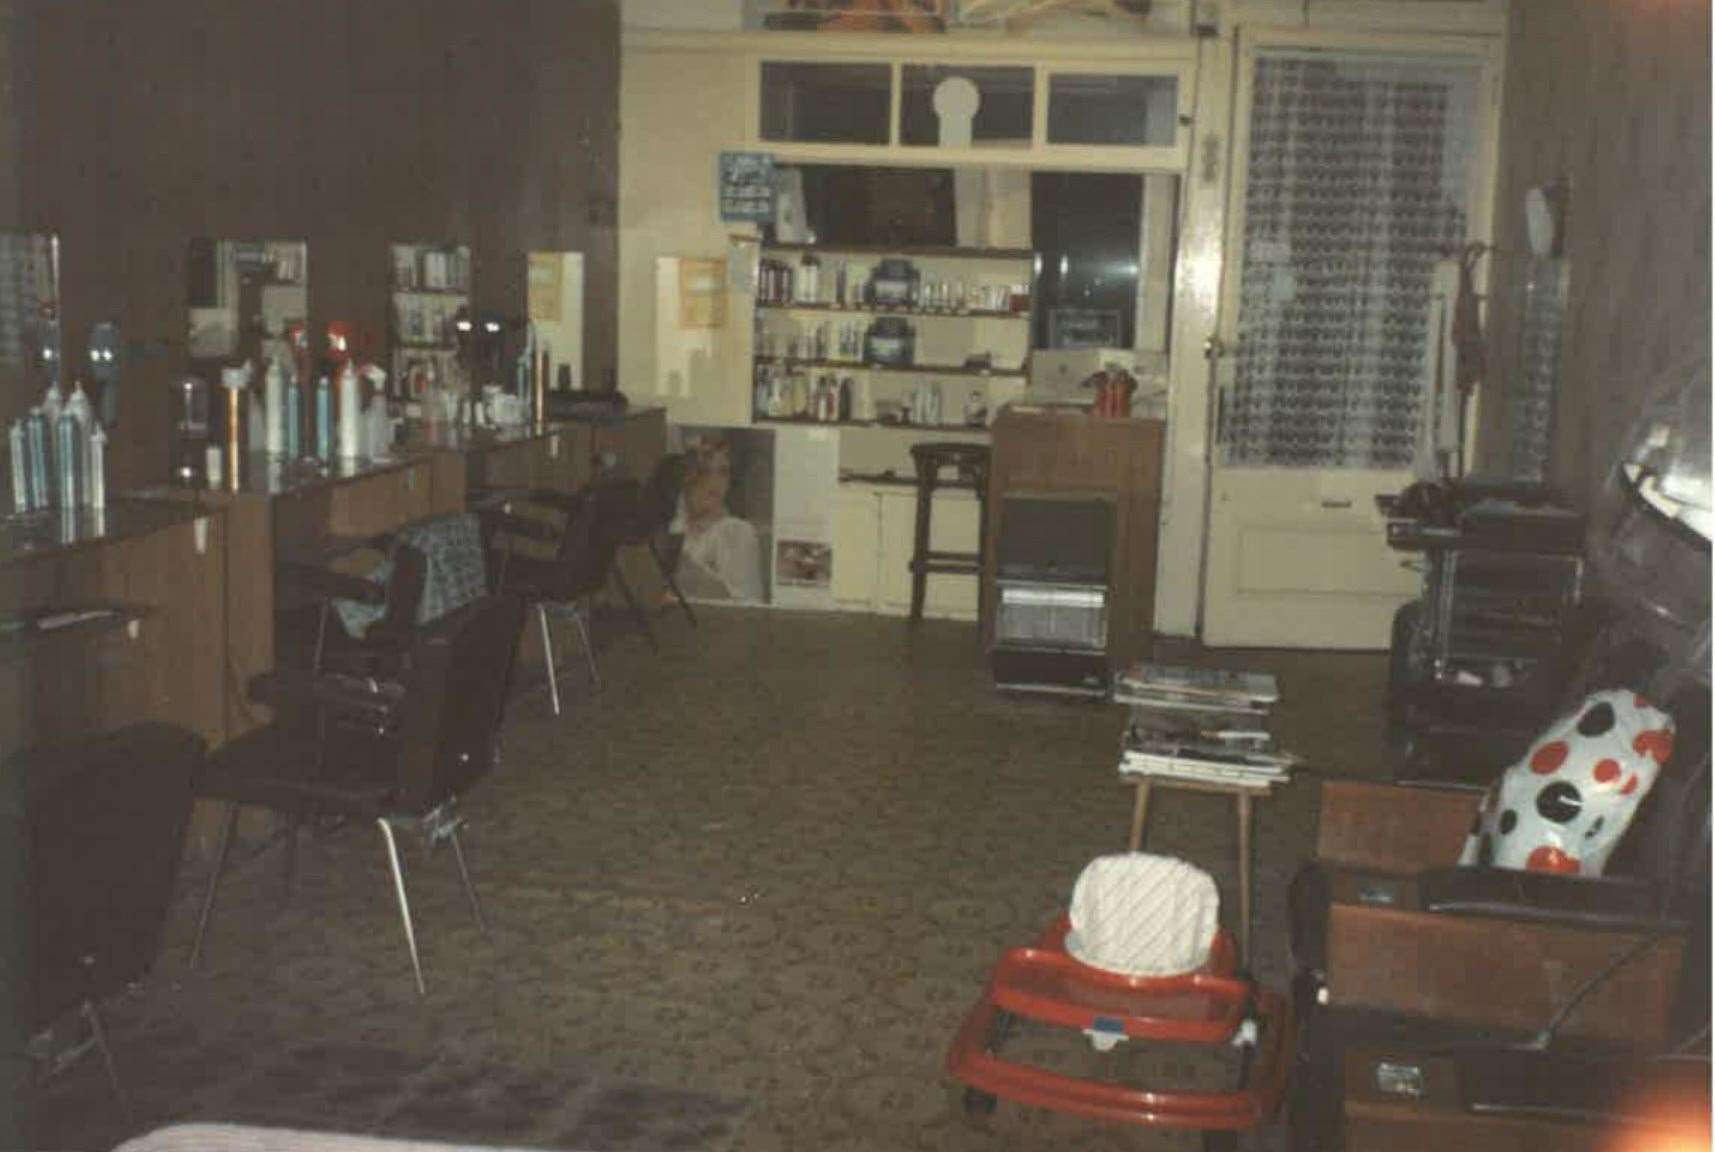 Carol Ann's Hairdressing. Over the years the salon underwent several changes and refurbs.